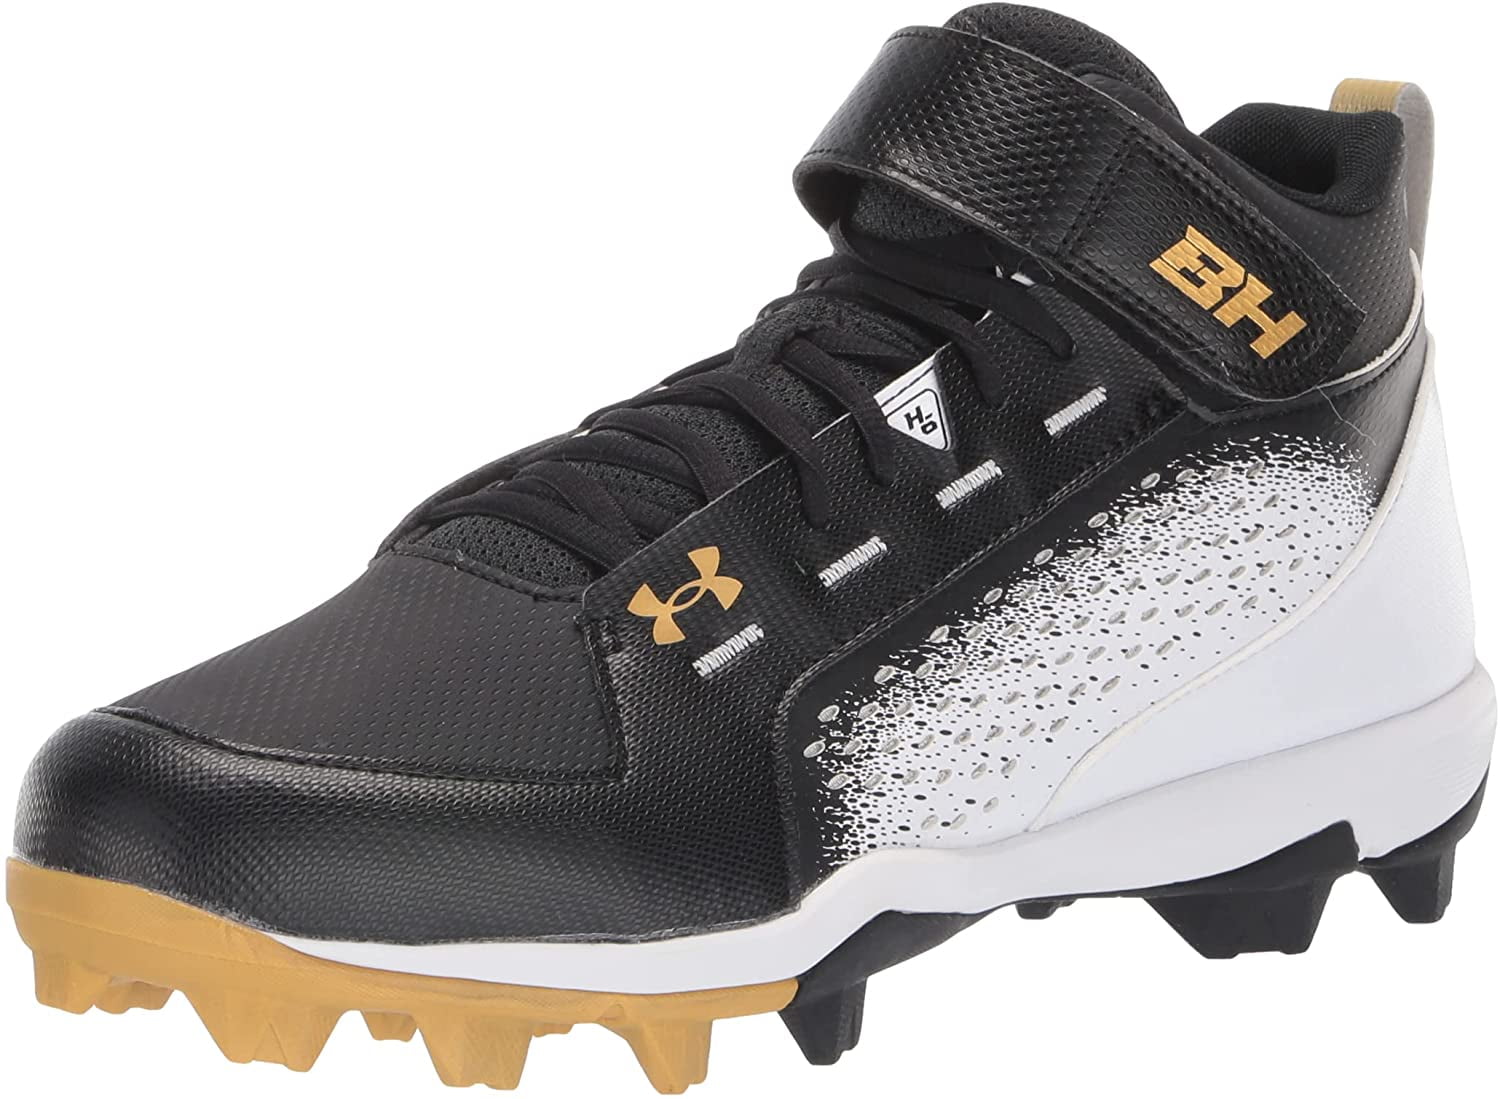 Under Armour Harper 5 Mid Rubber Molded Cleat WHITEROYALROYAL SZ 8 